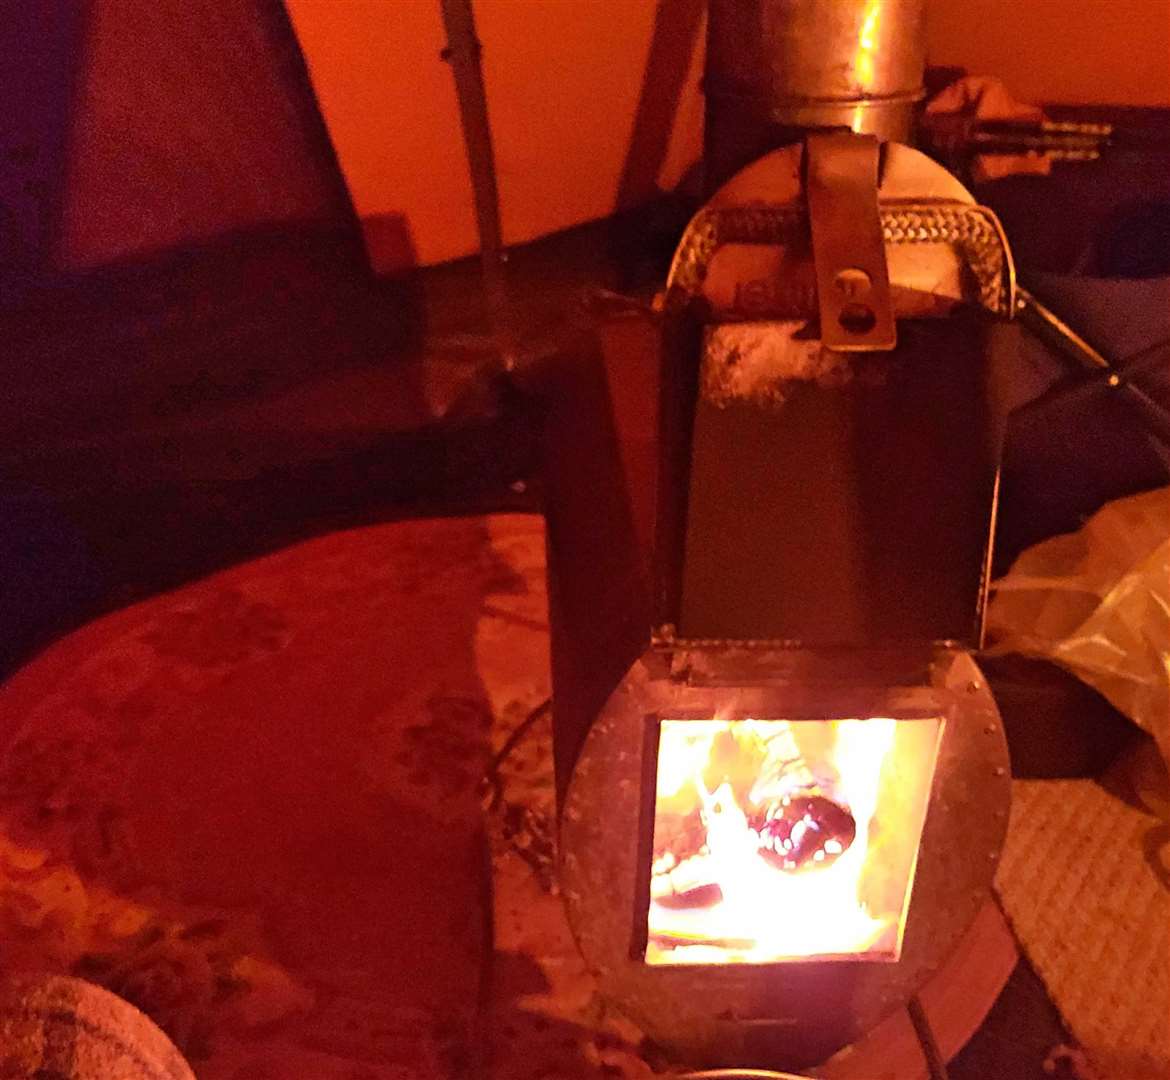 A woodburning stove heats the tent up quickly.